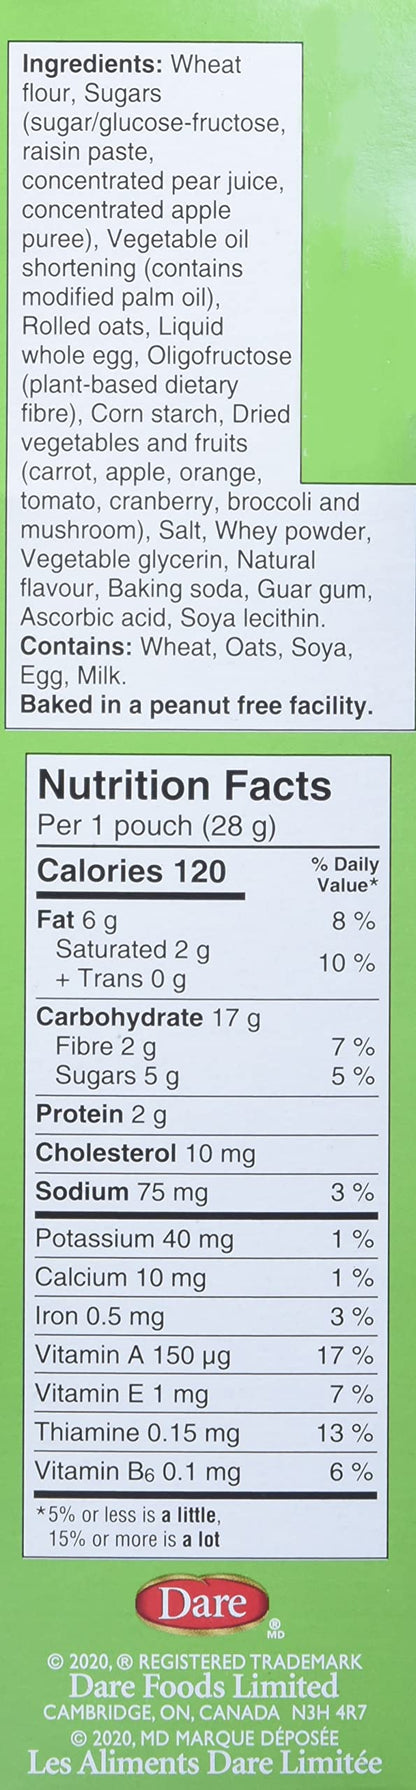 Dare Bear Paws Veggies Fruit Carrot Cake Nutrition Facts